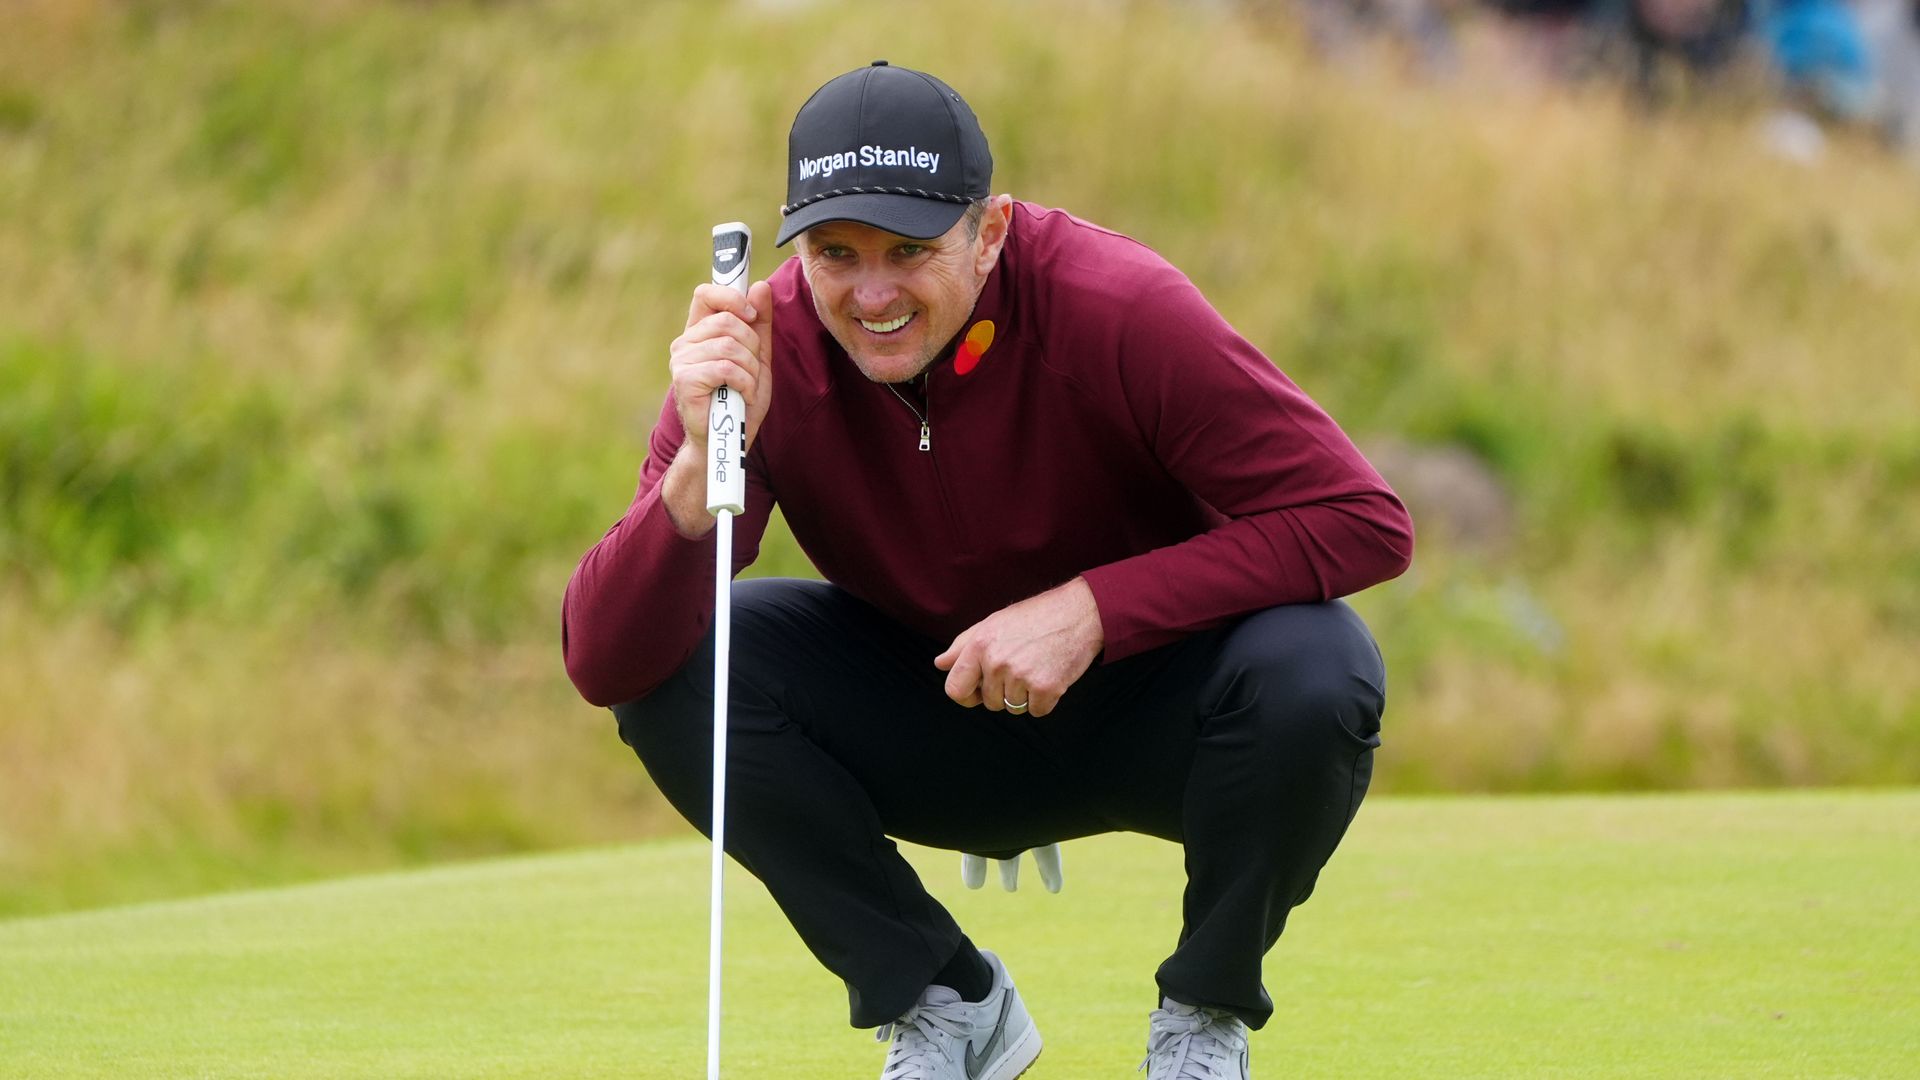 <a href='https://www.skysports.com/golf/live-blog/11071/13179580/the-open-live-updates-scores-leaderboards-highlights-as-rory-mcilroy-tiger-woods-scottie-scheffler-feature-at-royal-troon'>The Open live: England's Justin Rose makes a big move as Dan Brown falters </a>